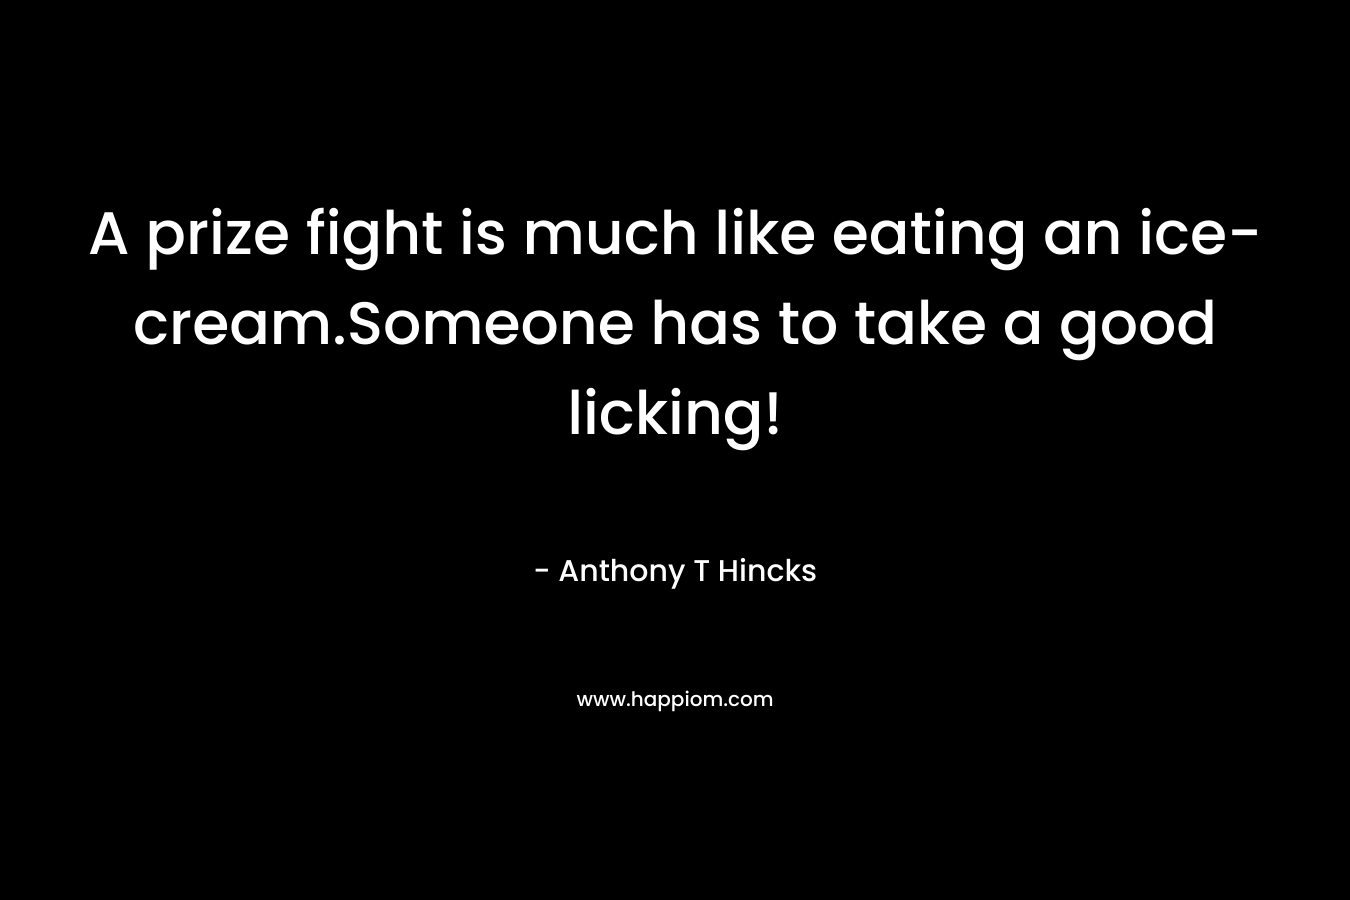 A prize fight is much like eating an ice-cream.Someone has to take a good licking! – Anthony T Hincks